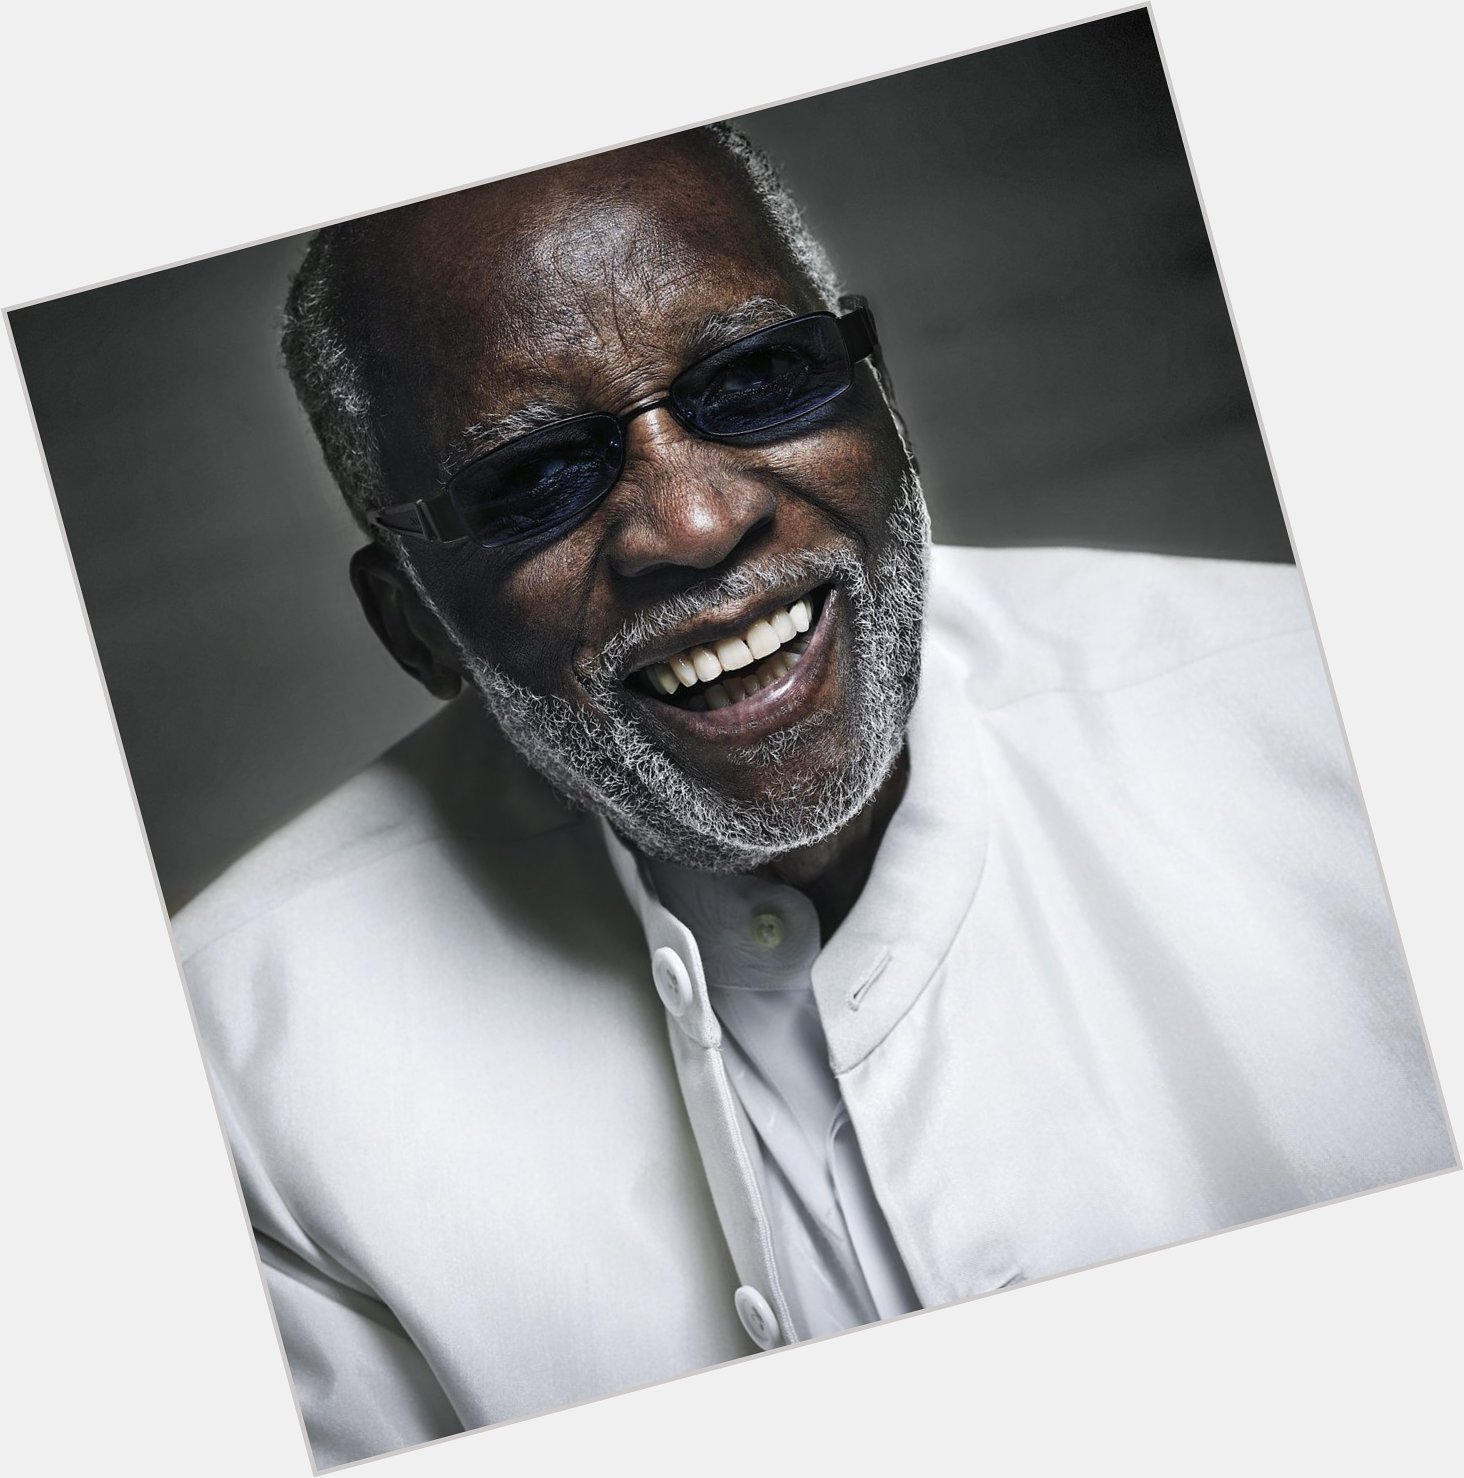 Happy 87th birthday to the great Ahmad Jamal, the musician Miles Davis wanted to be. 